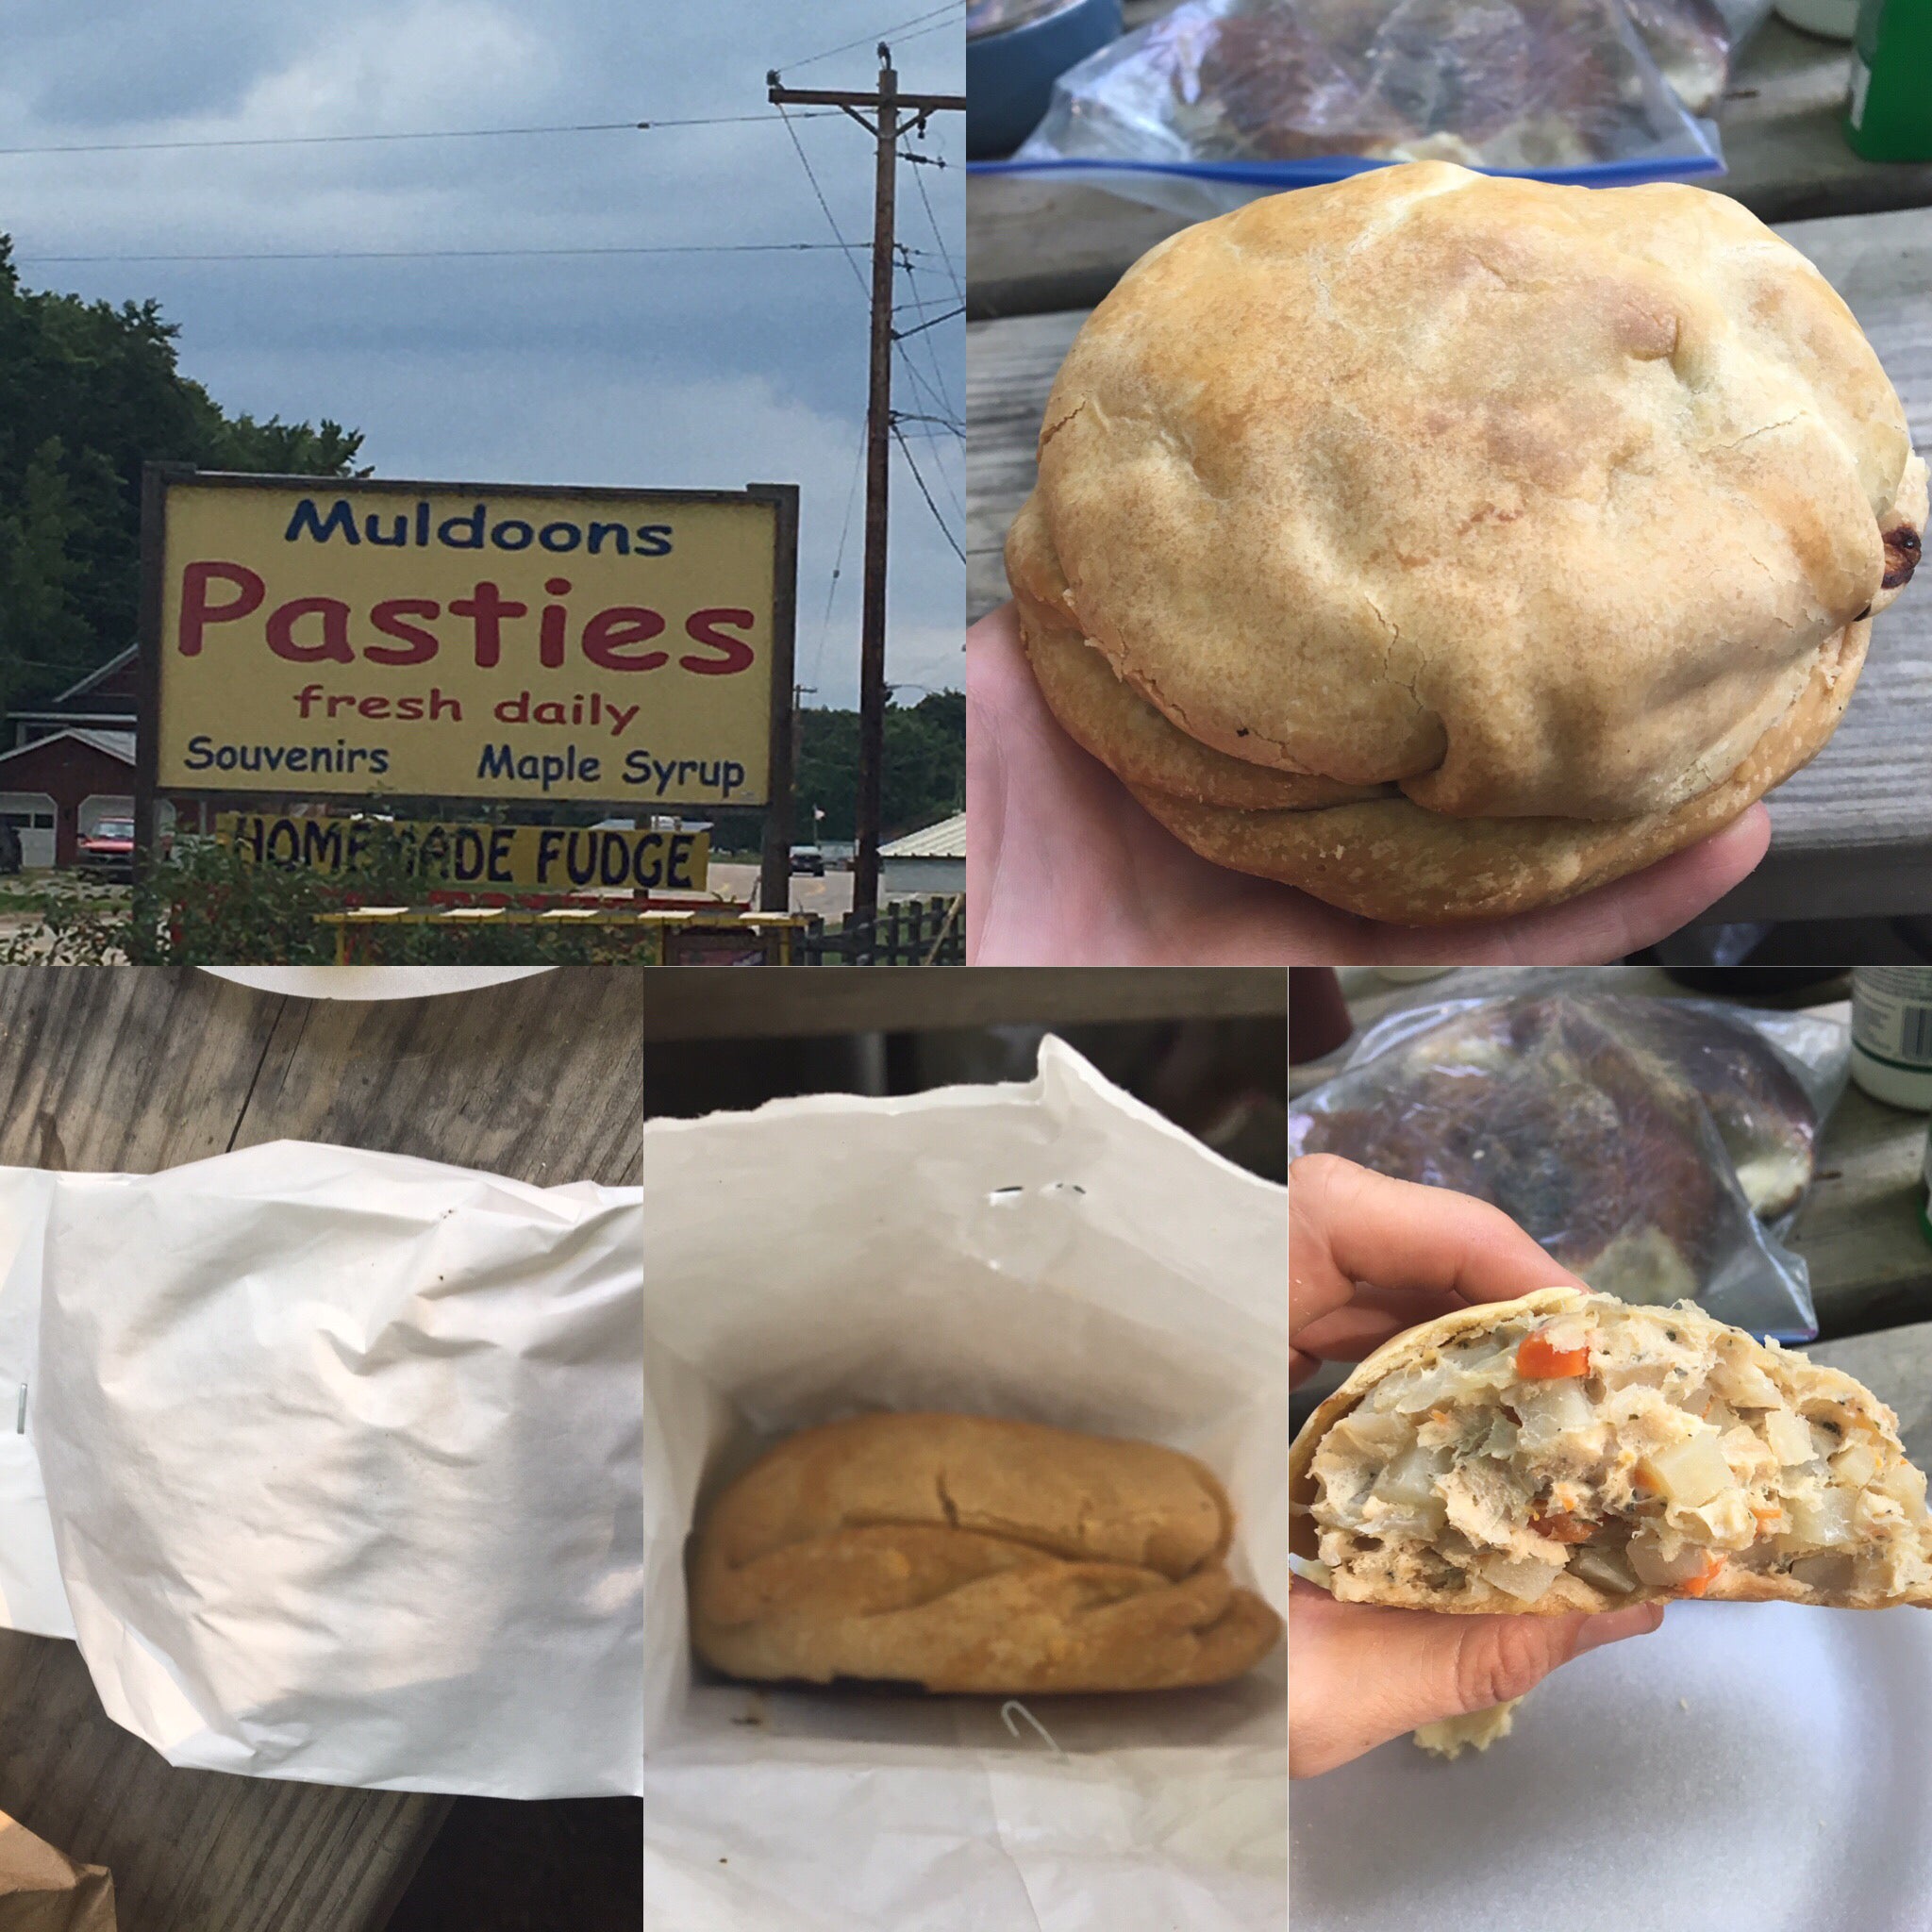 You simply must try the pasties. At several locations in Munising( as well as fudge ;)